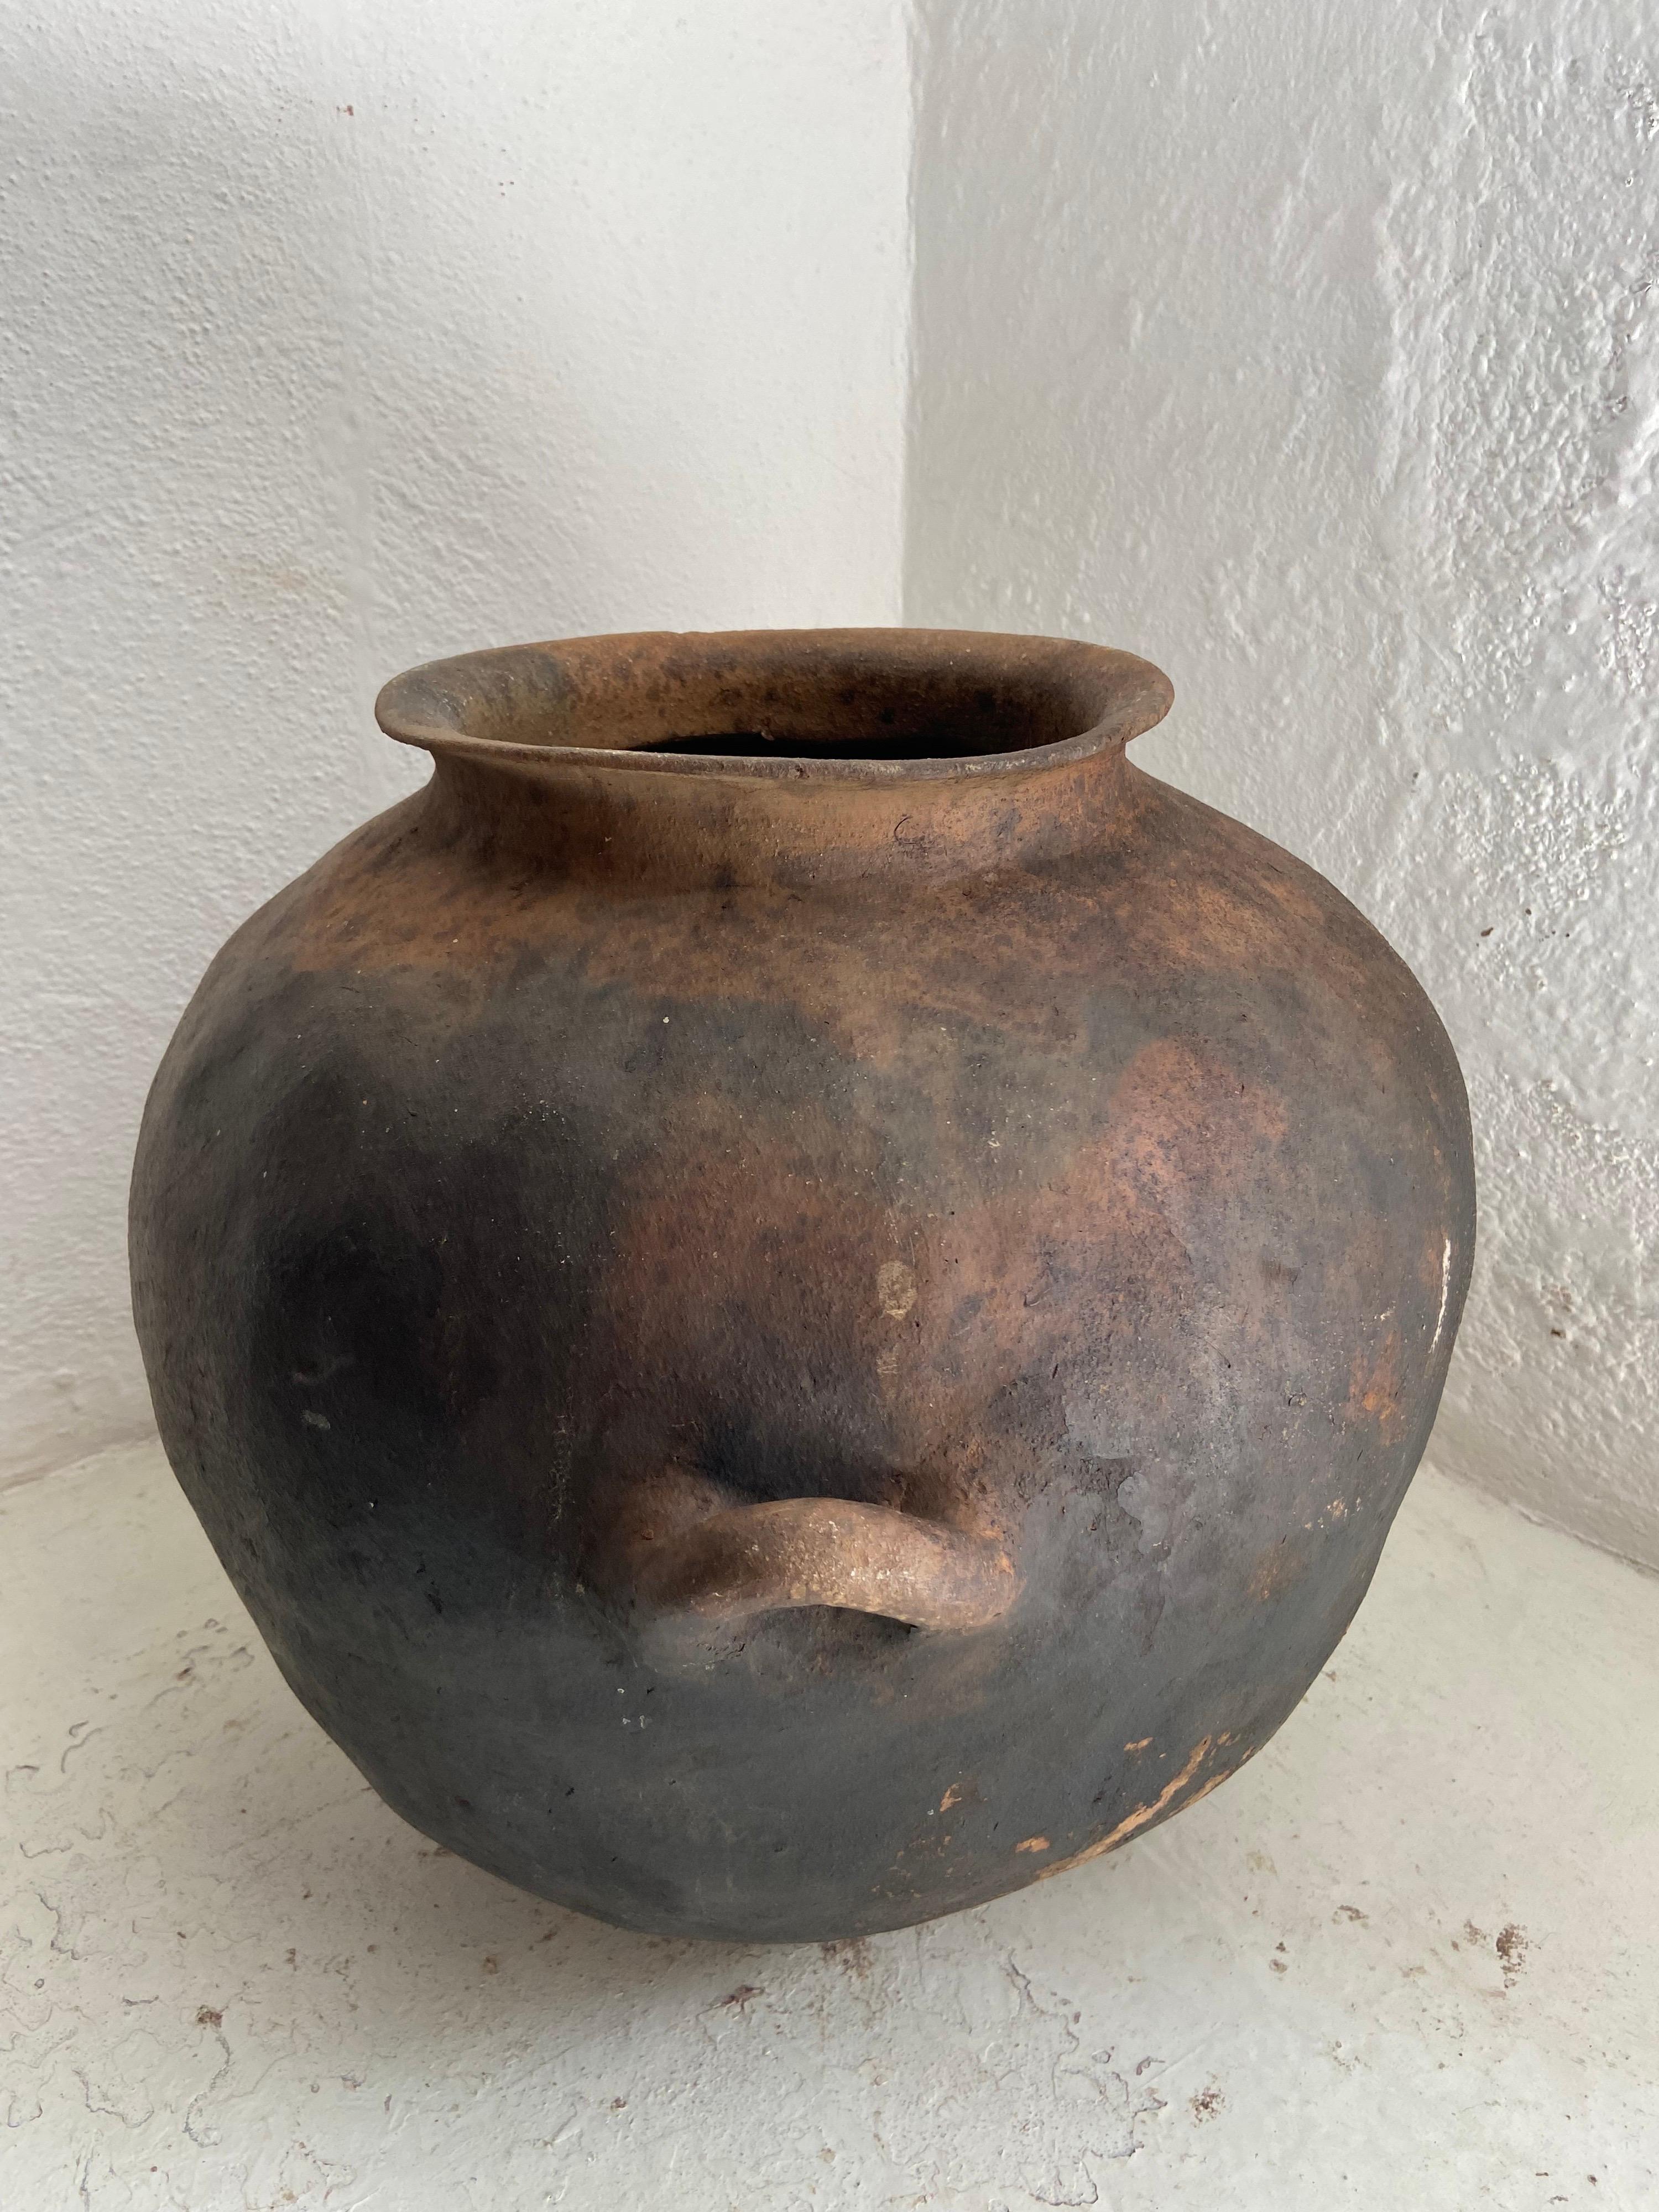 Fired Early 20th Century Water Jar from Mexico